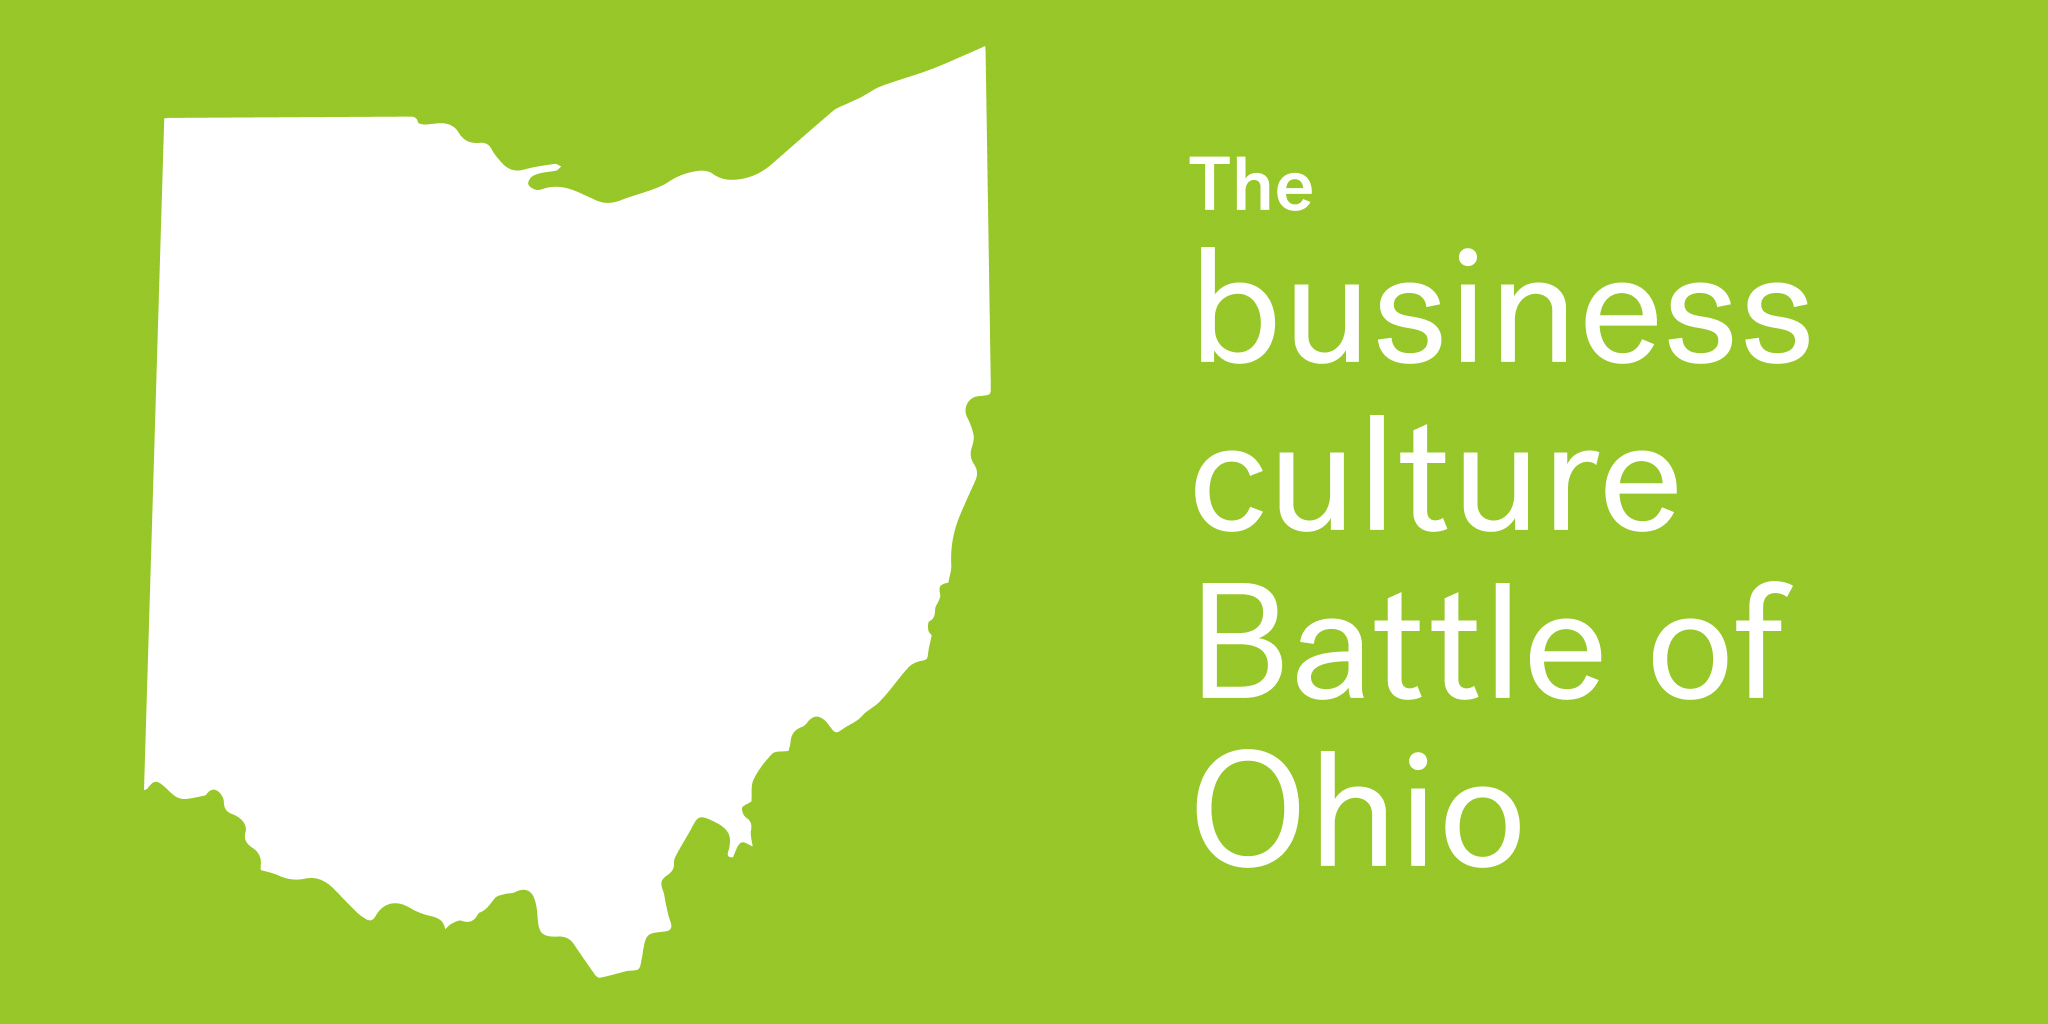 Map of the state of Ohio on a green background, with the title to the right: "The business culture battle of Ohio" 